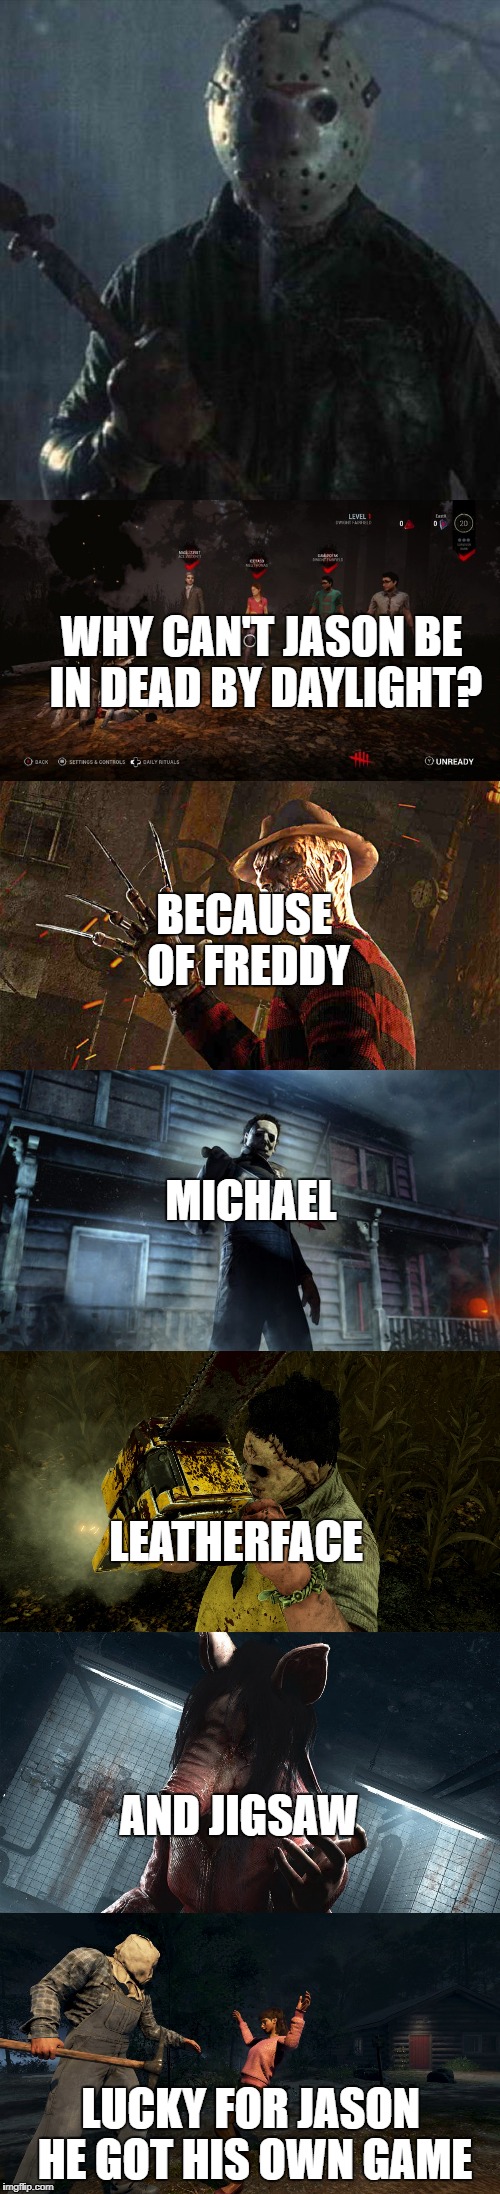 WHY CAN'T JASON BE IN DEAD BY DAYLIGHT? BECAUSE OF FREDDY; MICHAEL; LEATHERFACE; AND JIGSAW; LUCKY FOR JASON HE GOT HIS OWN GAME | image tagged in friday the 13th,video games,horror,jason voorhees,freddy krueger,michael myers | made w/ Imgflip meme maker